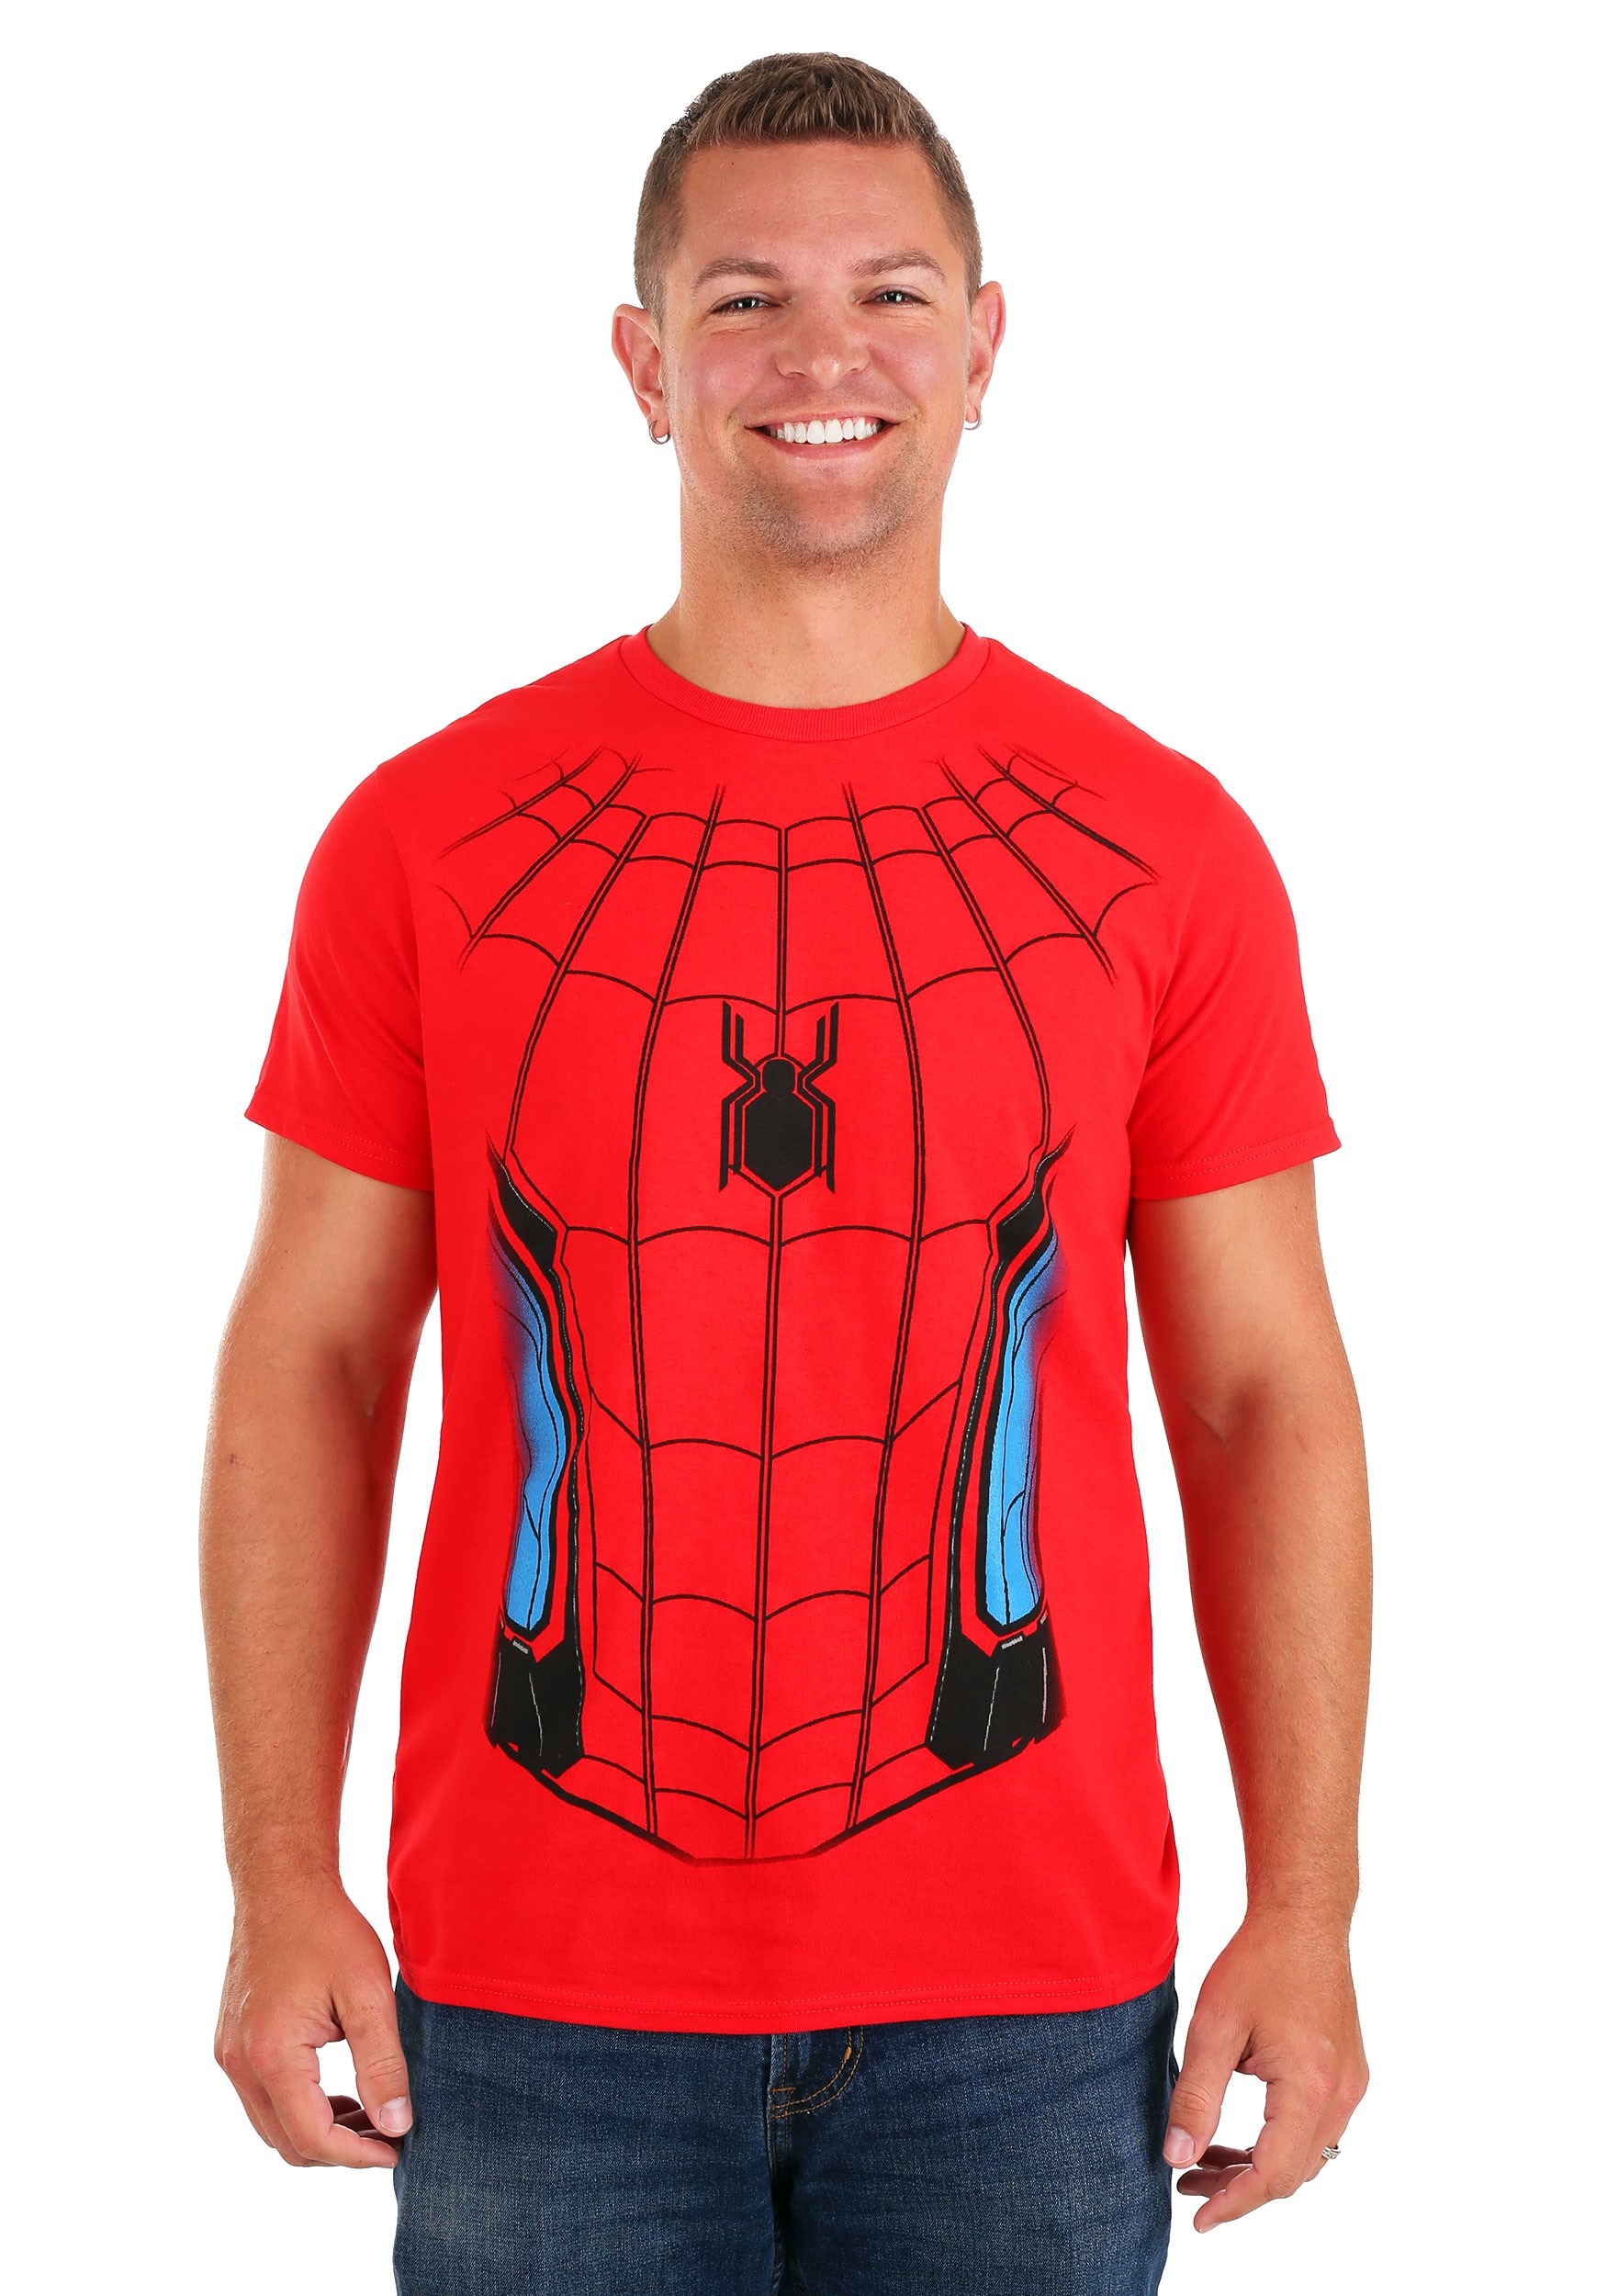 Spider-Man Far From Home T-Shirt Costume